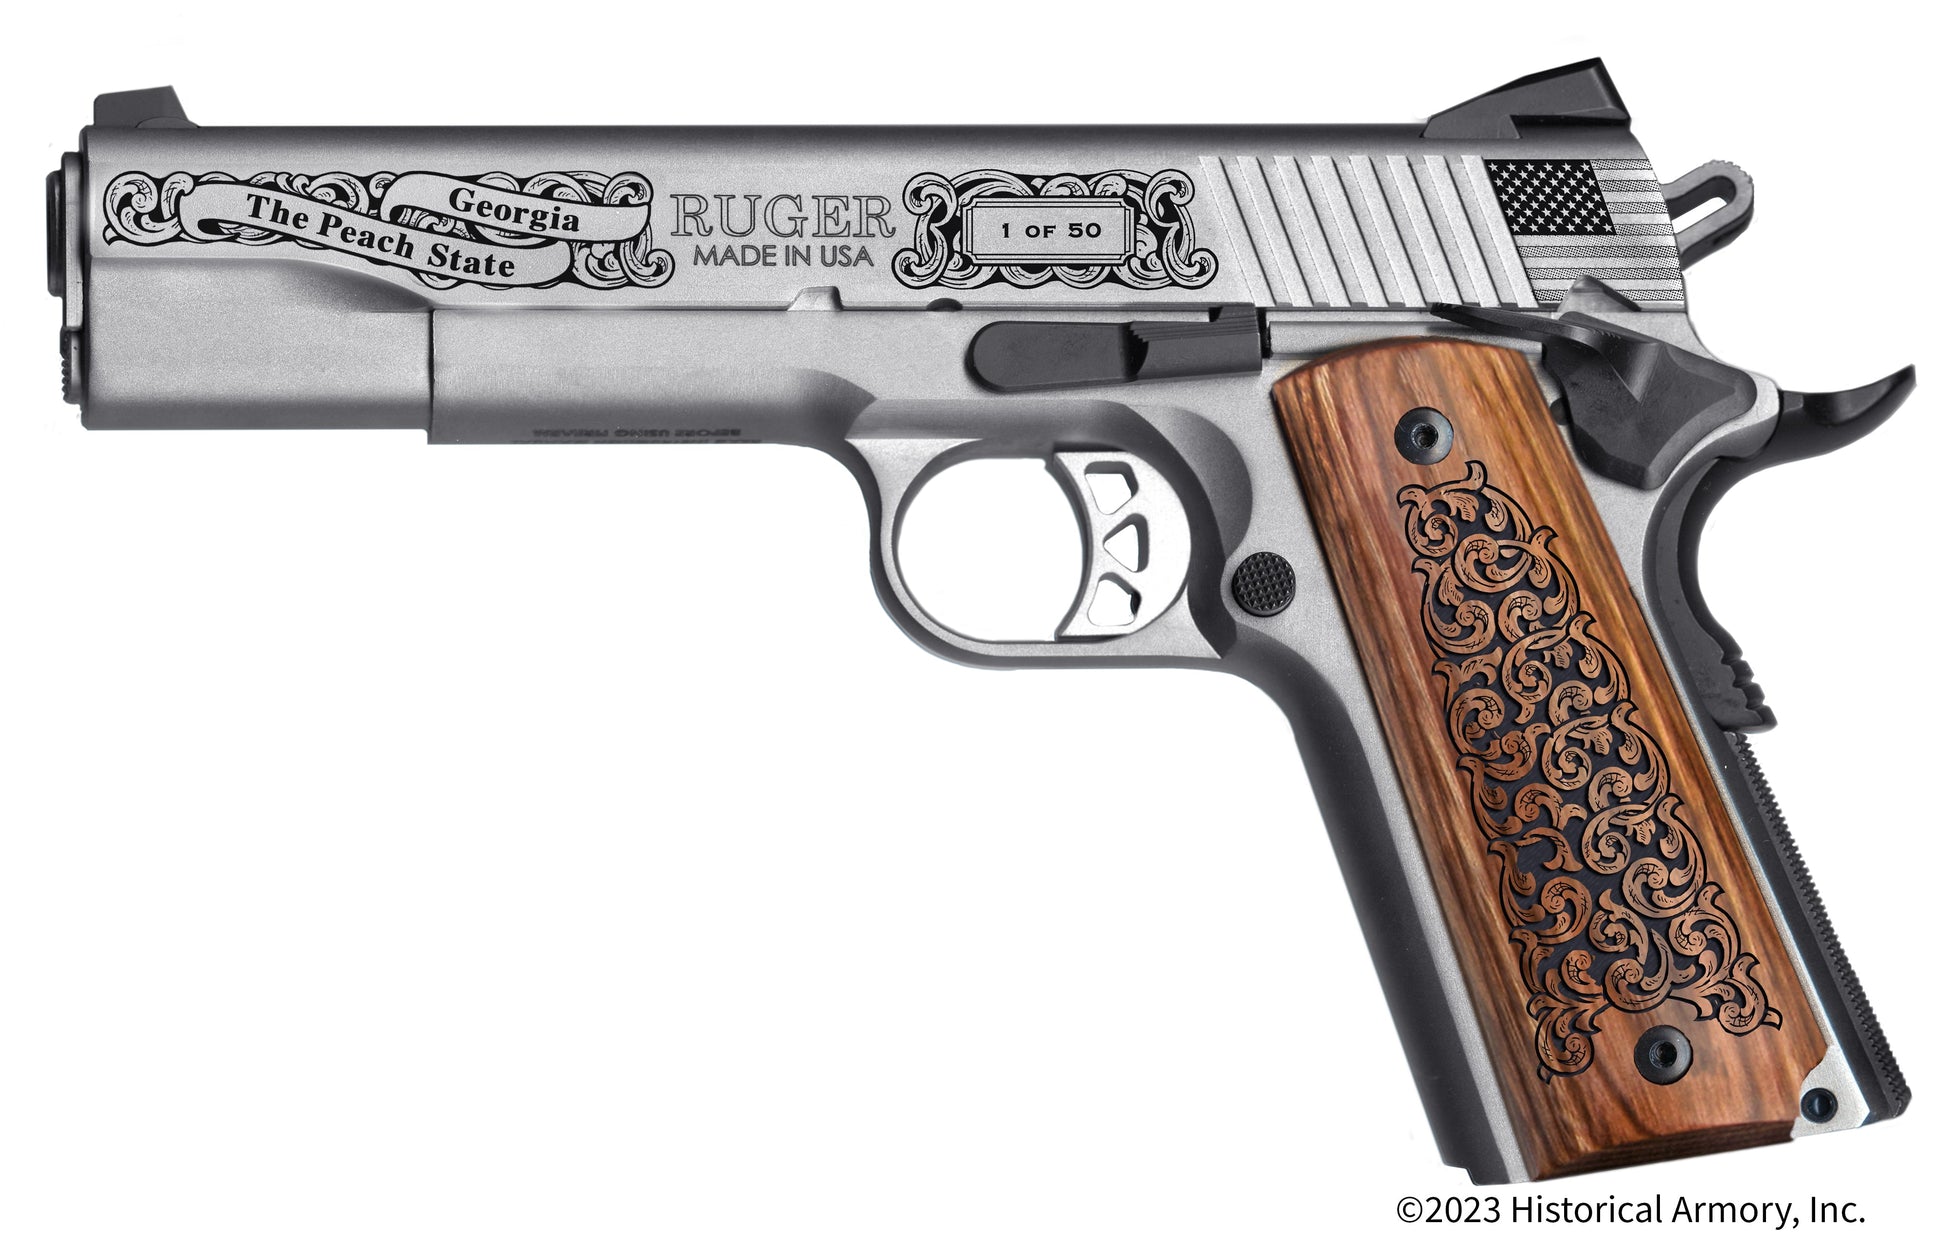 Bacon County Georgia Engraved .45 Auto Ruger 1911